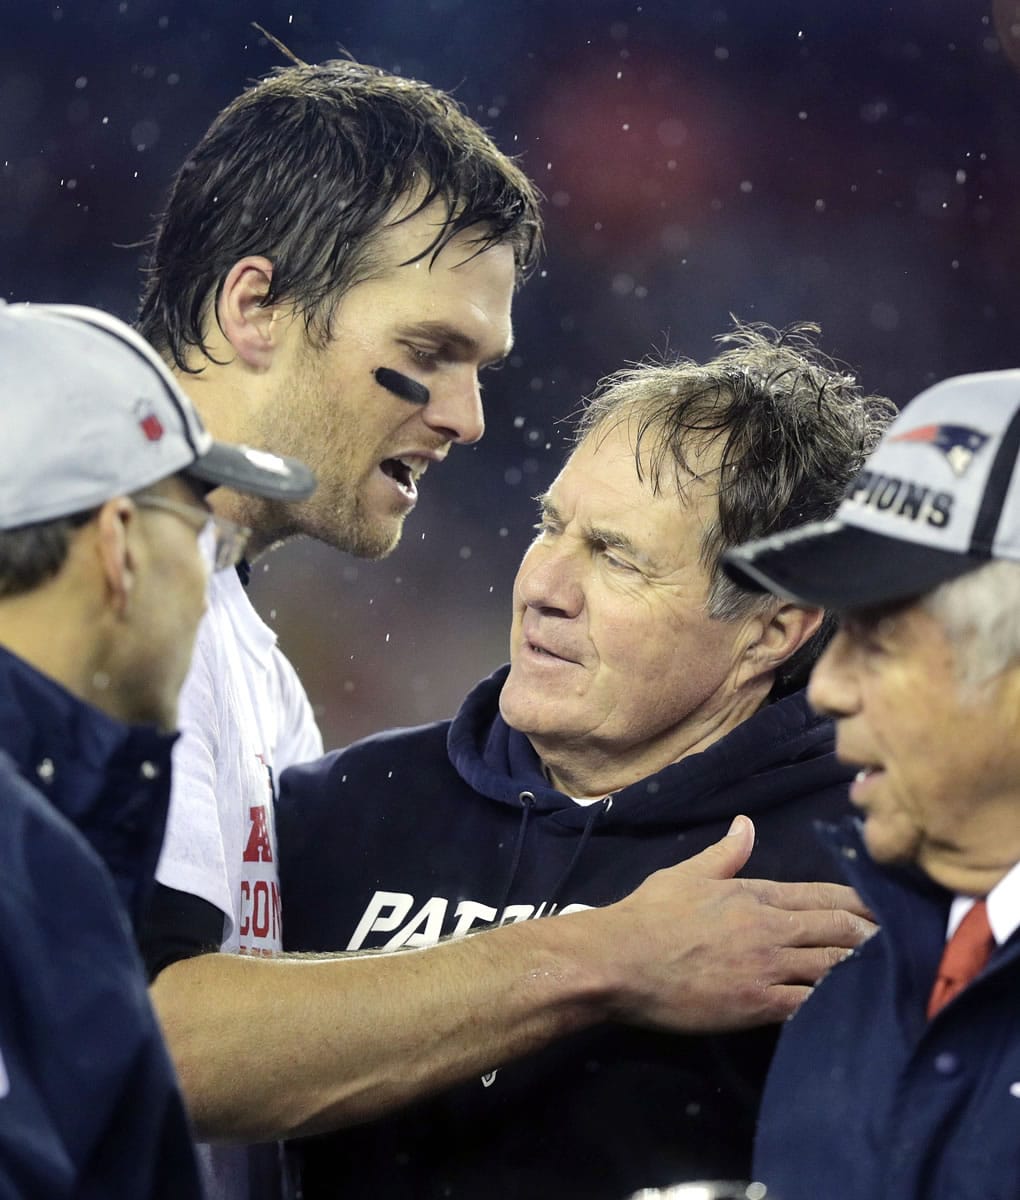 New England Patriots quarterback Tom Brady, left, speaks with Bill Belichick after winning the AFC Championship game Sunday, Jan. 18, 2015, in Foxborough, Mass. The Patriots defeated the Colts 45-7 to advance to the Super Bowl against the Seattle Seahawks.